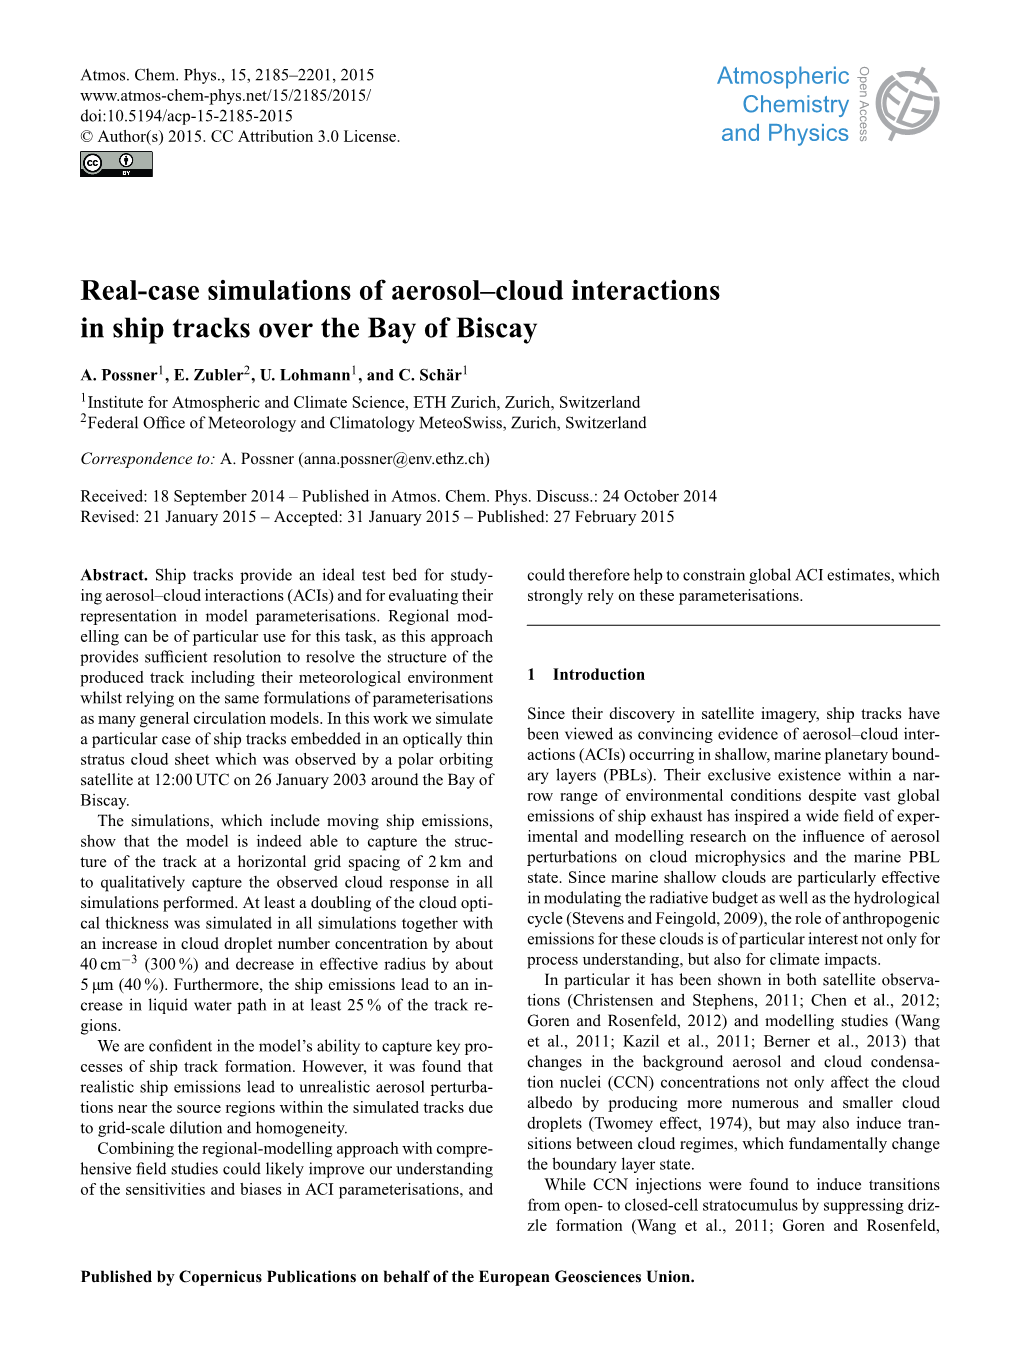 Real-Case Simulations of Aerosol–Cloud Interactions in Ship Tracks Over the Bay of Biscay